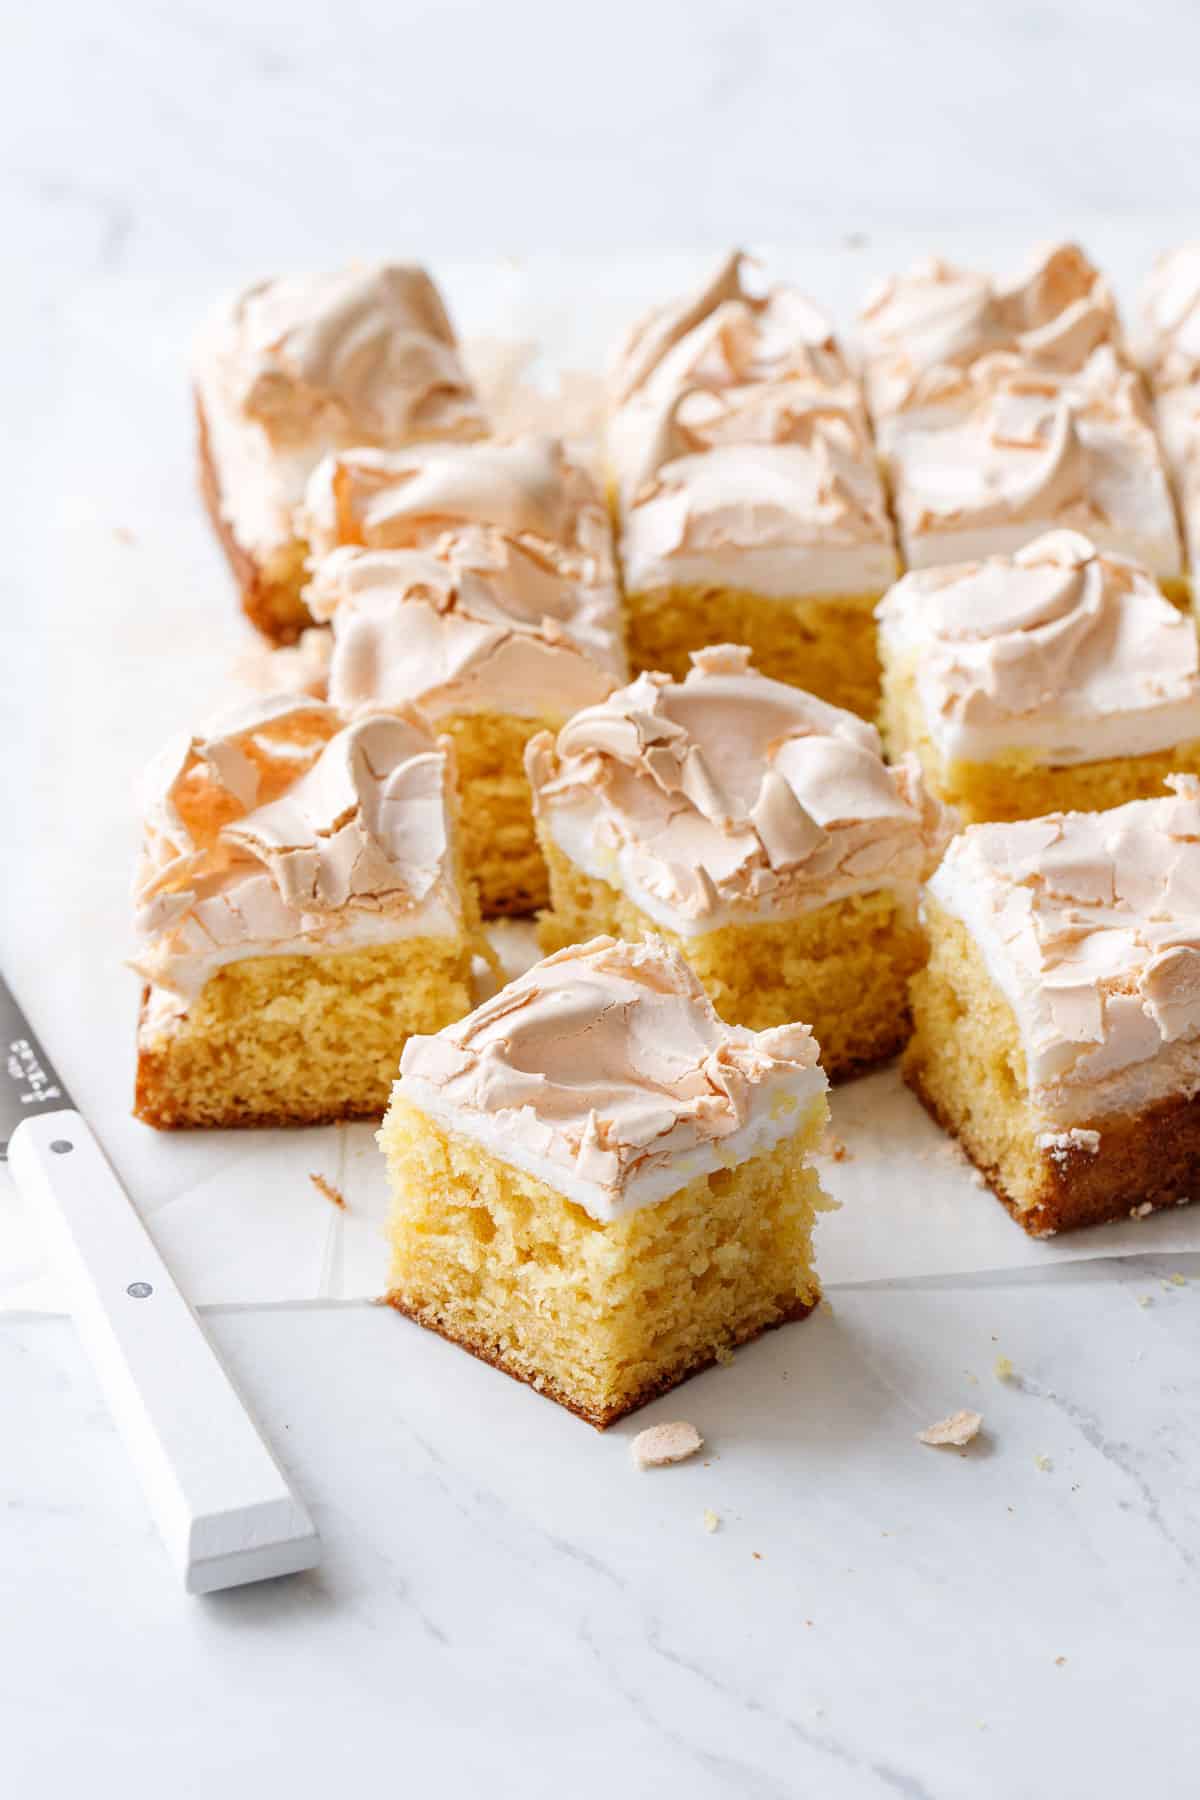 Lemon Meringue Butter Cake cut into squares showing the layers of tender yellow butter cake and toasted meringue swirled on top.